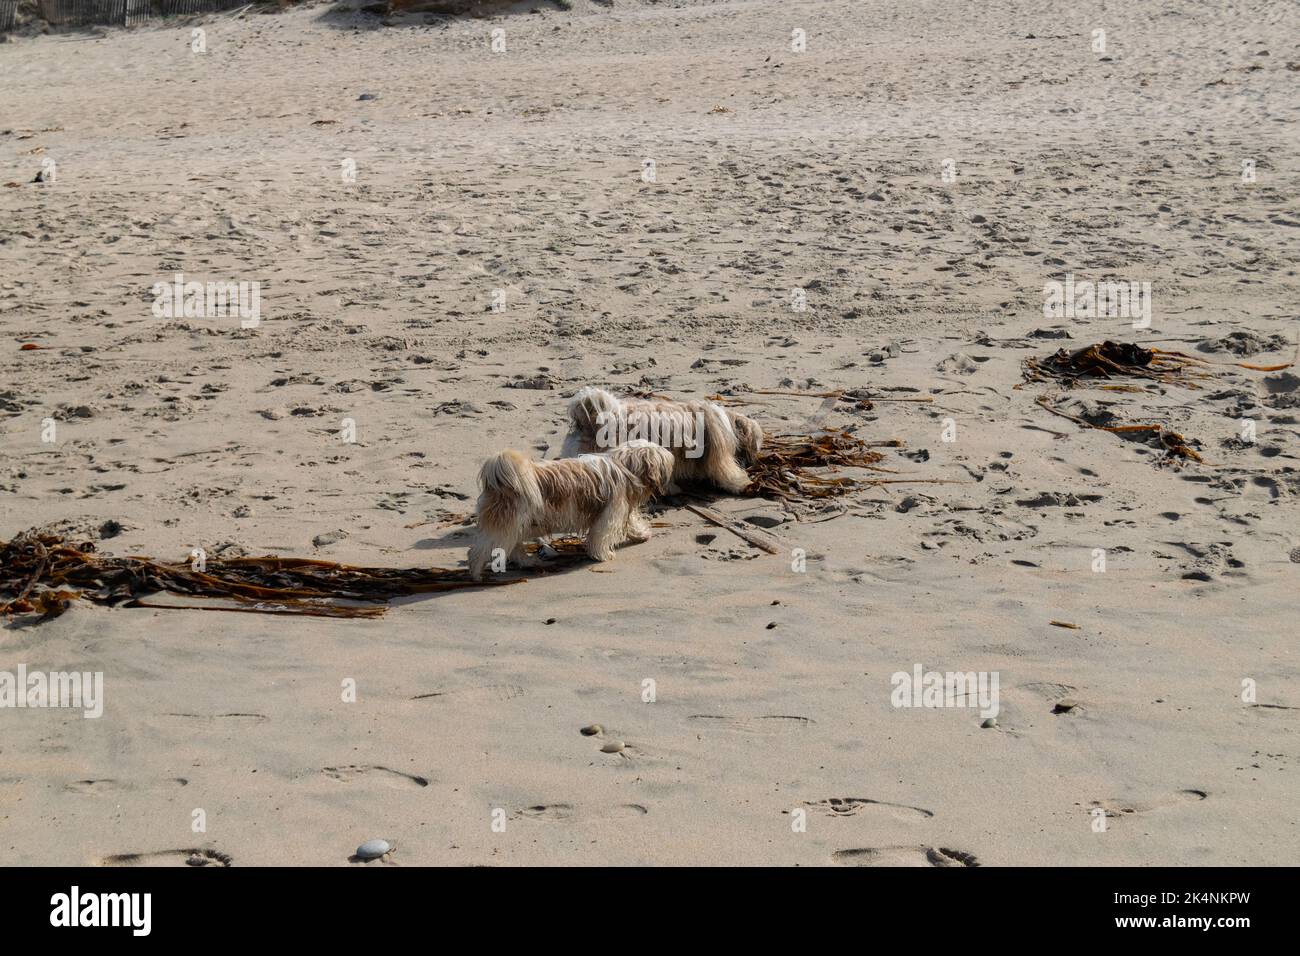 Dogs on the beach. Twin dogs going out for a walk on the beach. Dogs outdoors on the beach sniffing the sand. Stock Photo